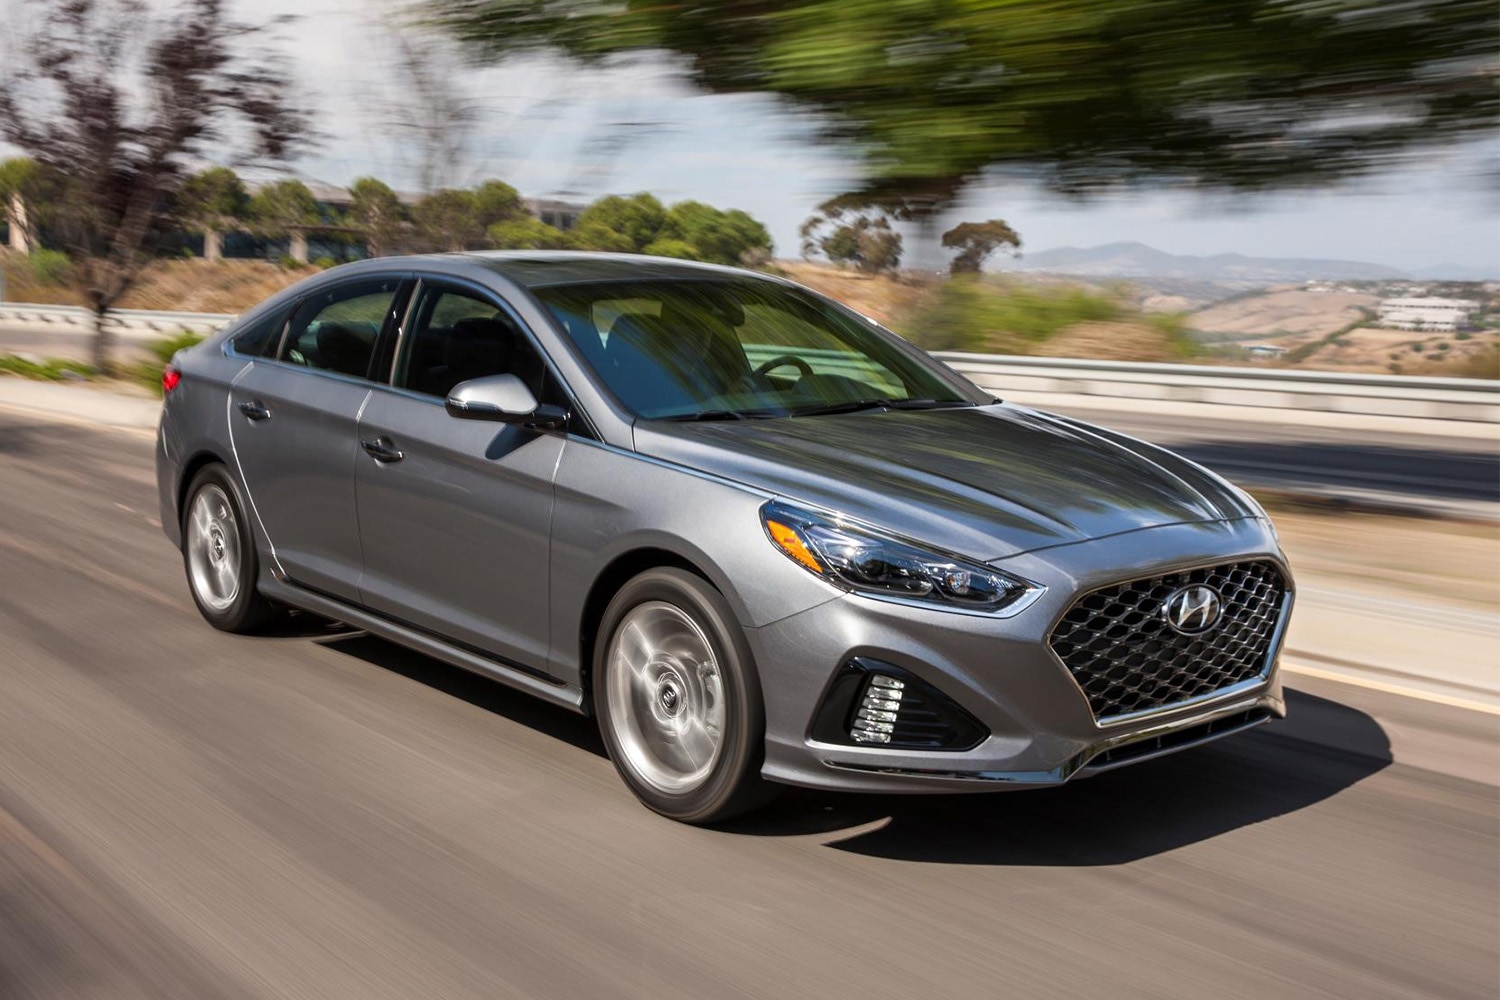 2018 Hyundai Sonata: One of Capital One's 10 Best Road Trip Vehicles, According to Science